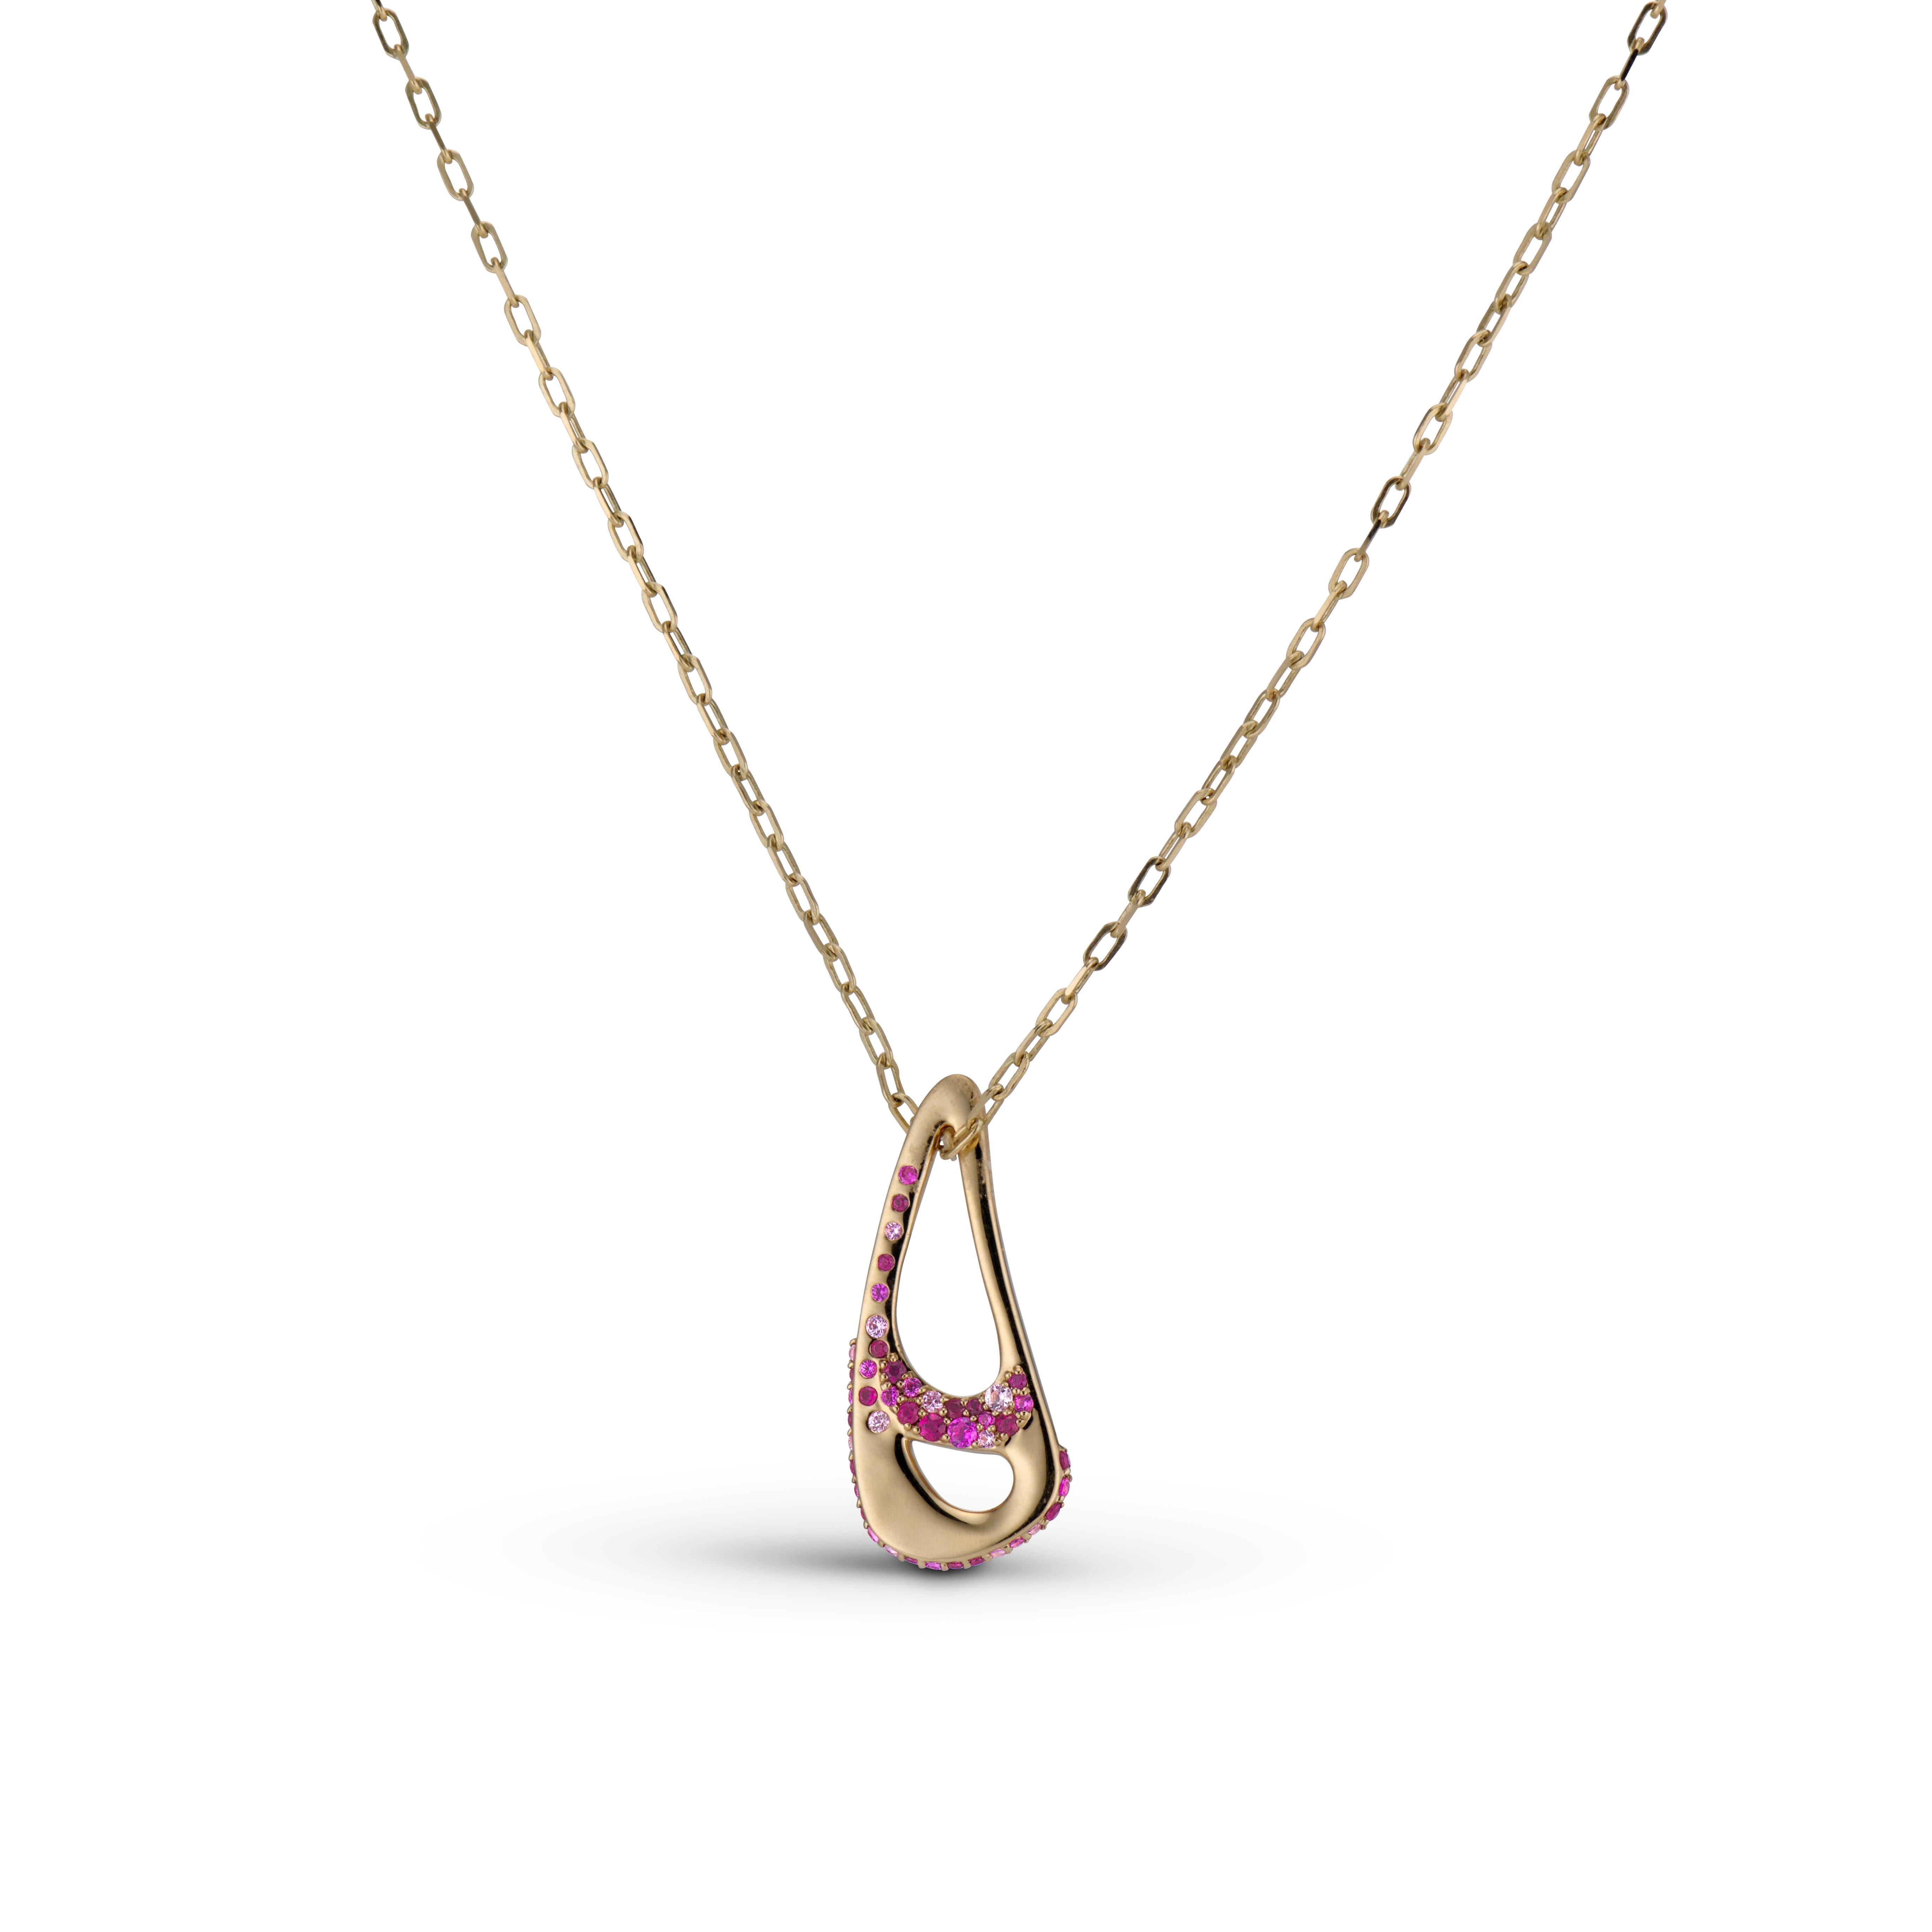 The Petite BALANCE pendant embodies the desire for stability in one's life.  As contemporary life pulls us into so many different directions, we need to be reminded to re-center our being and find the equilibrium we all need.  

Here the 18kt gold